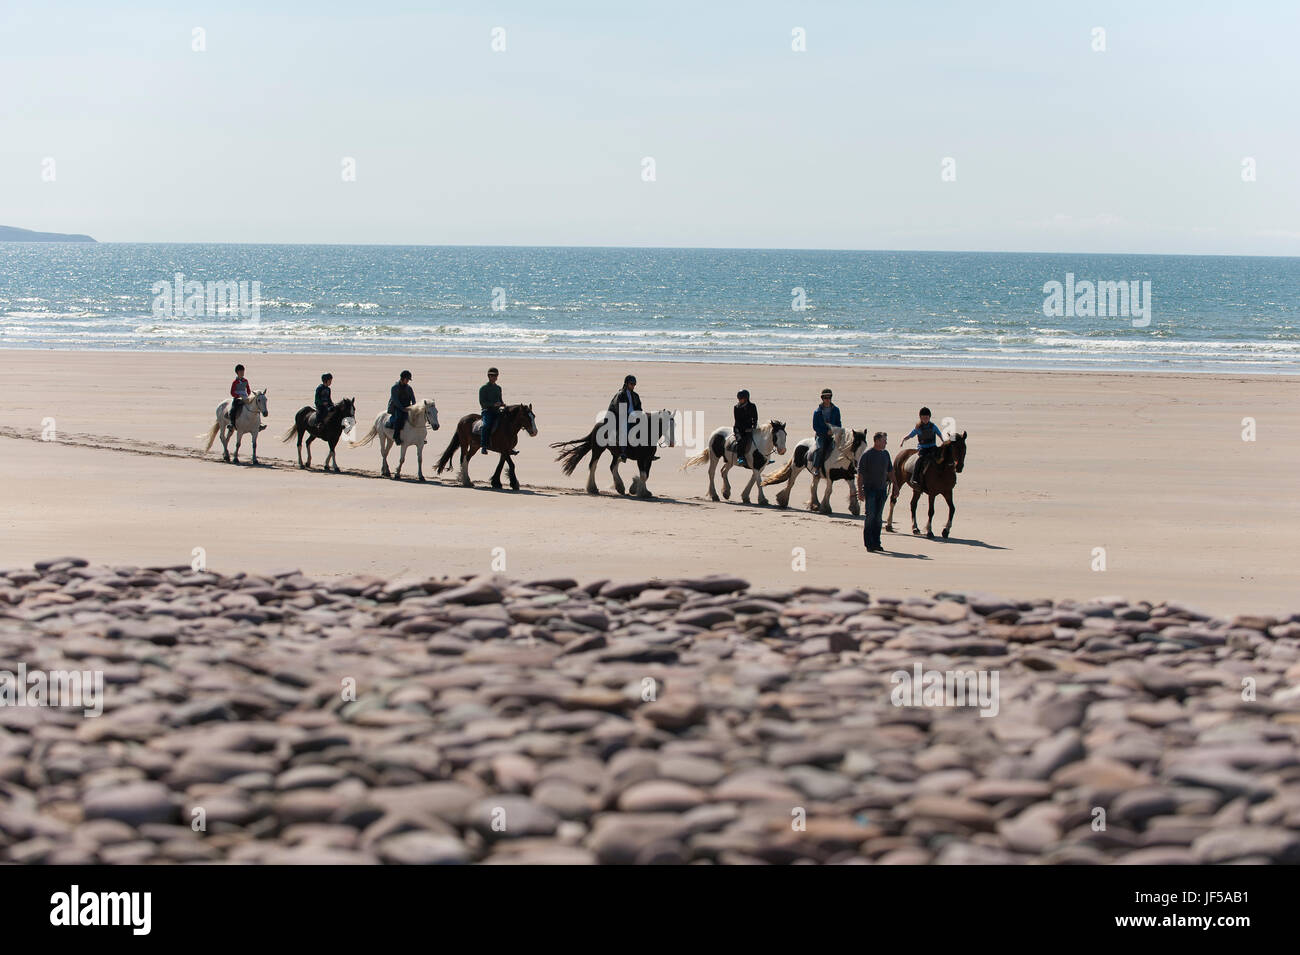 Horseback riders on an excursion are led by a man on Rossbeigh beach in County Kerry, Ireland. Stock Photo